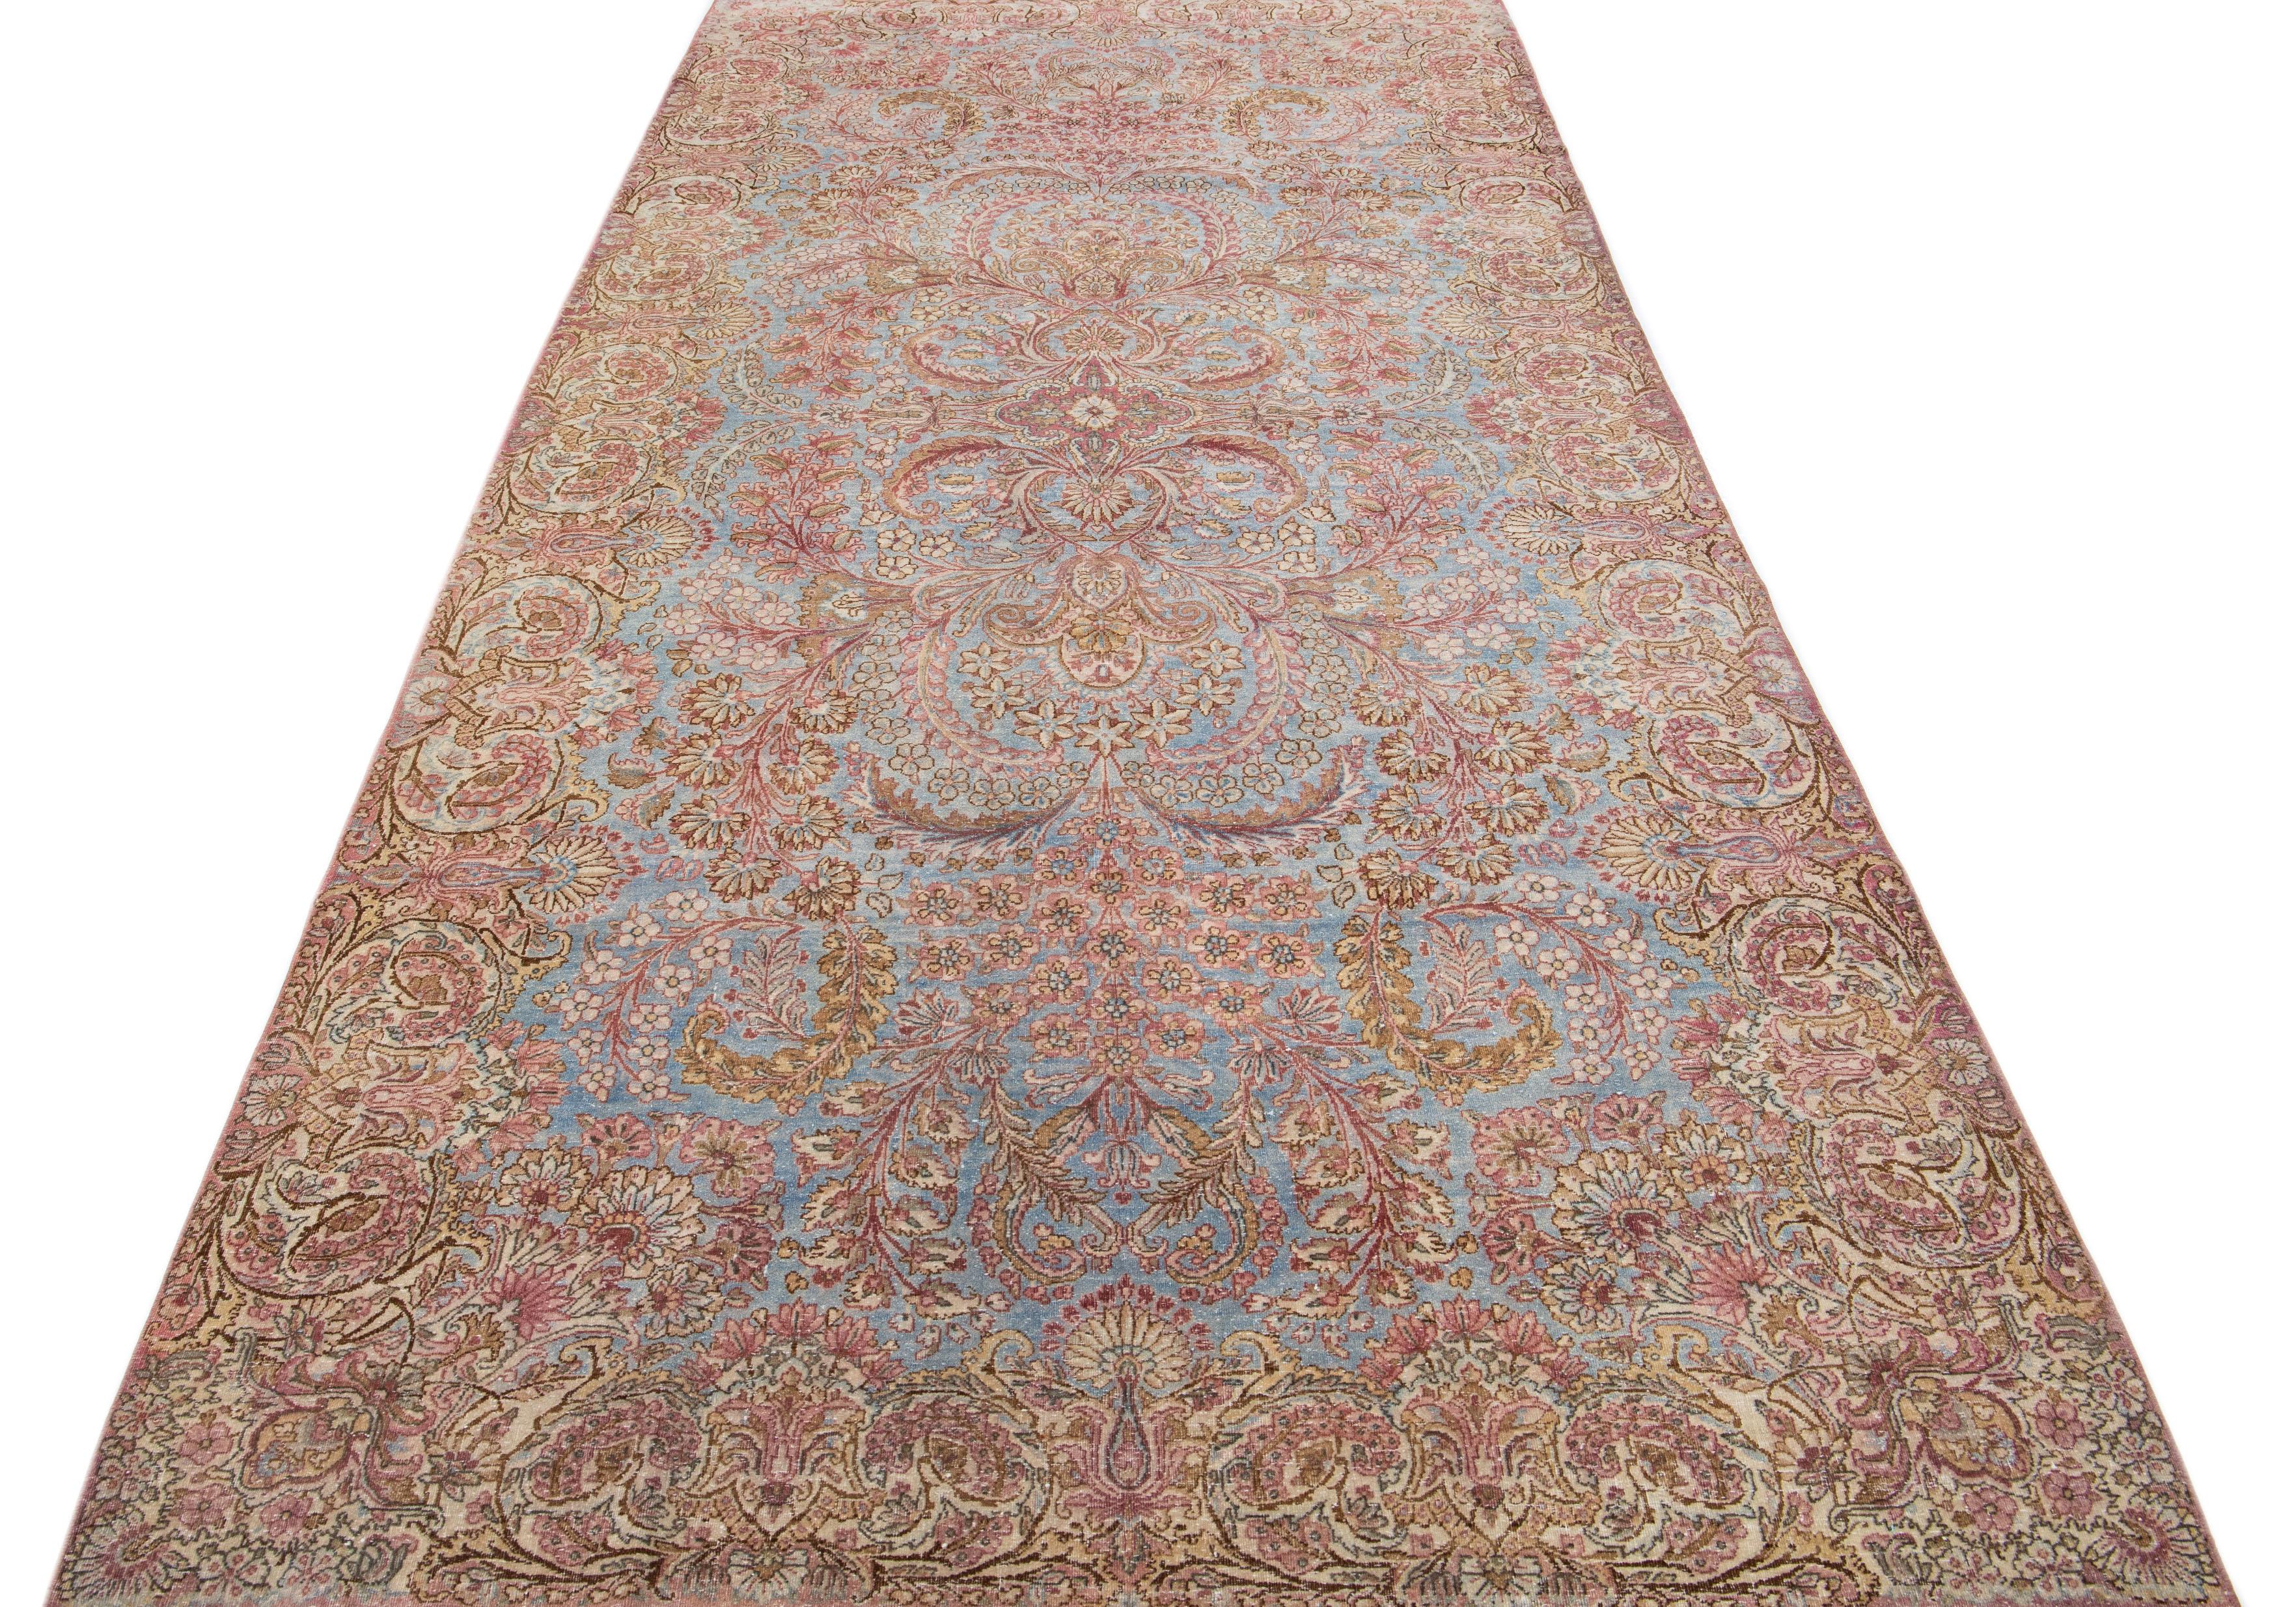 Beautiful antique Kirman hand-knotted wool rug with a blue color field. This Persian rug has beige and pink accents in a gorgeous traditional floral design.

This rug measures 5'9